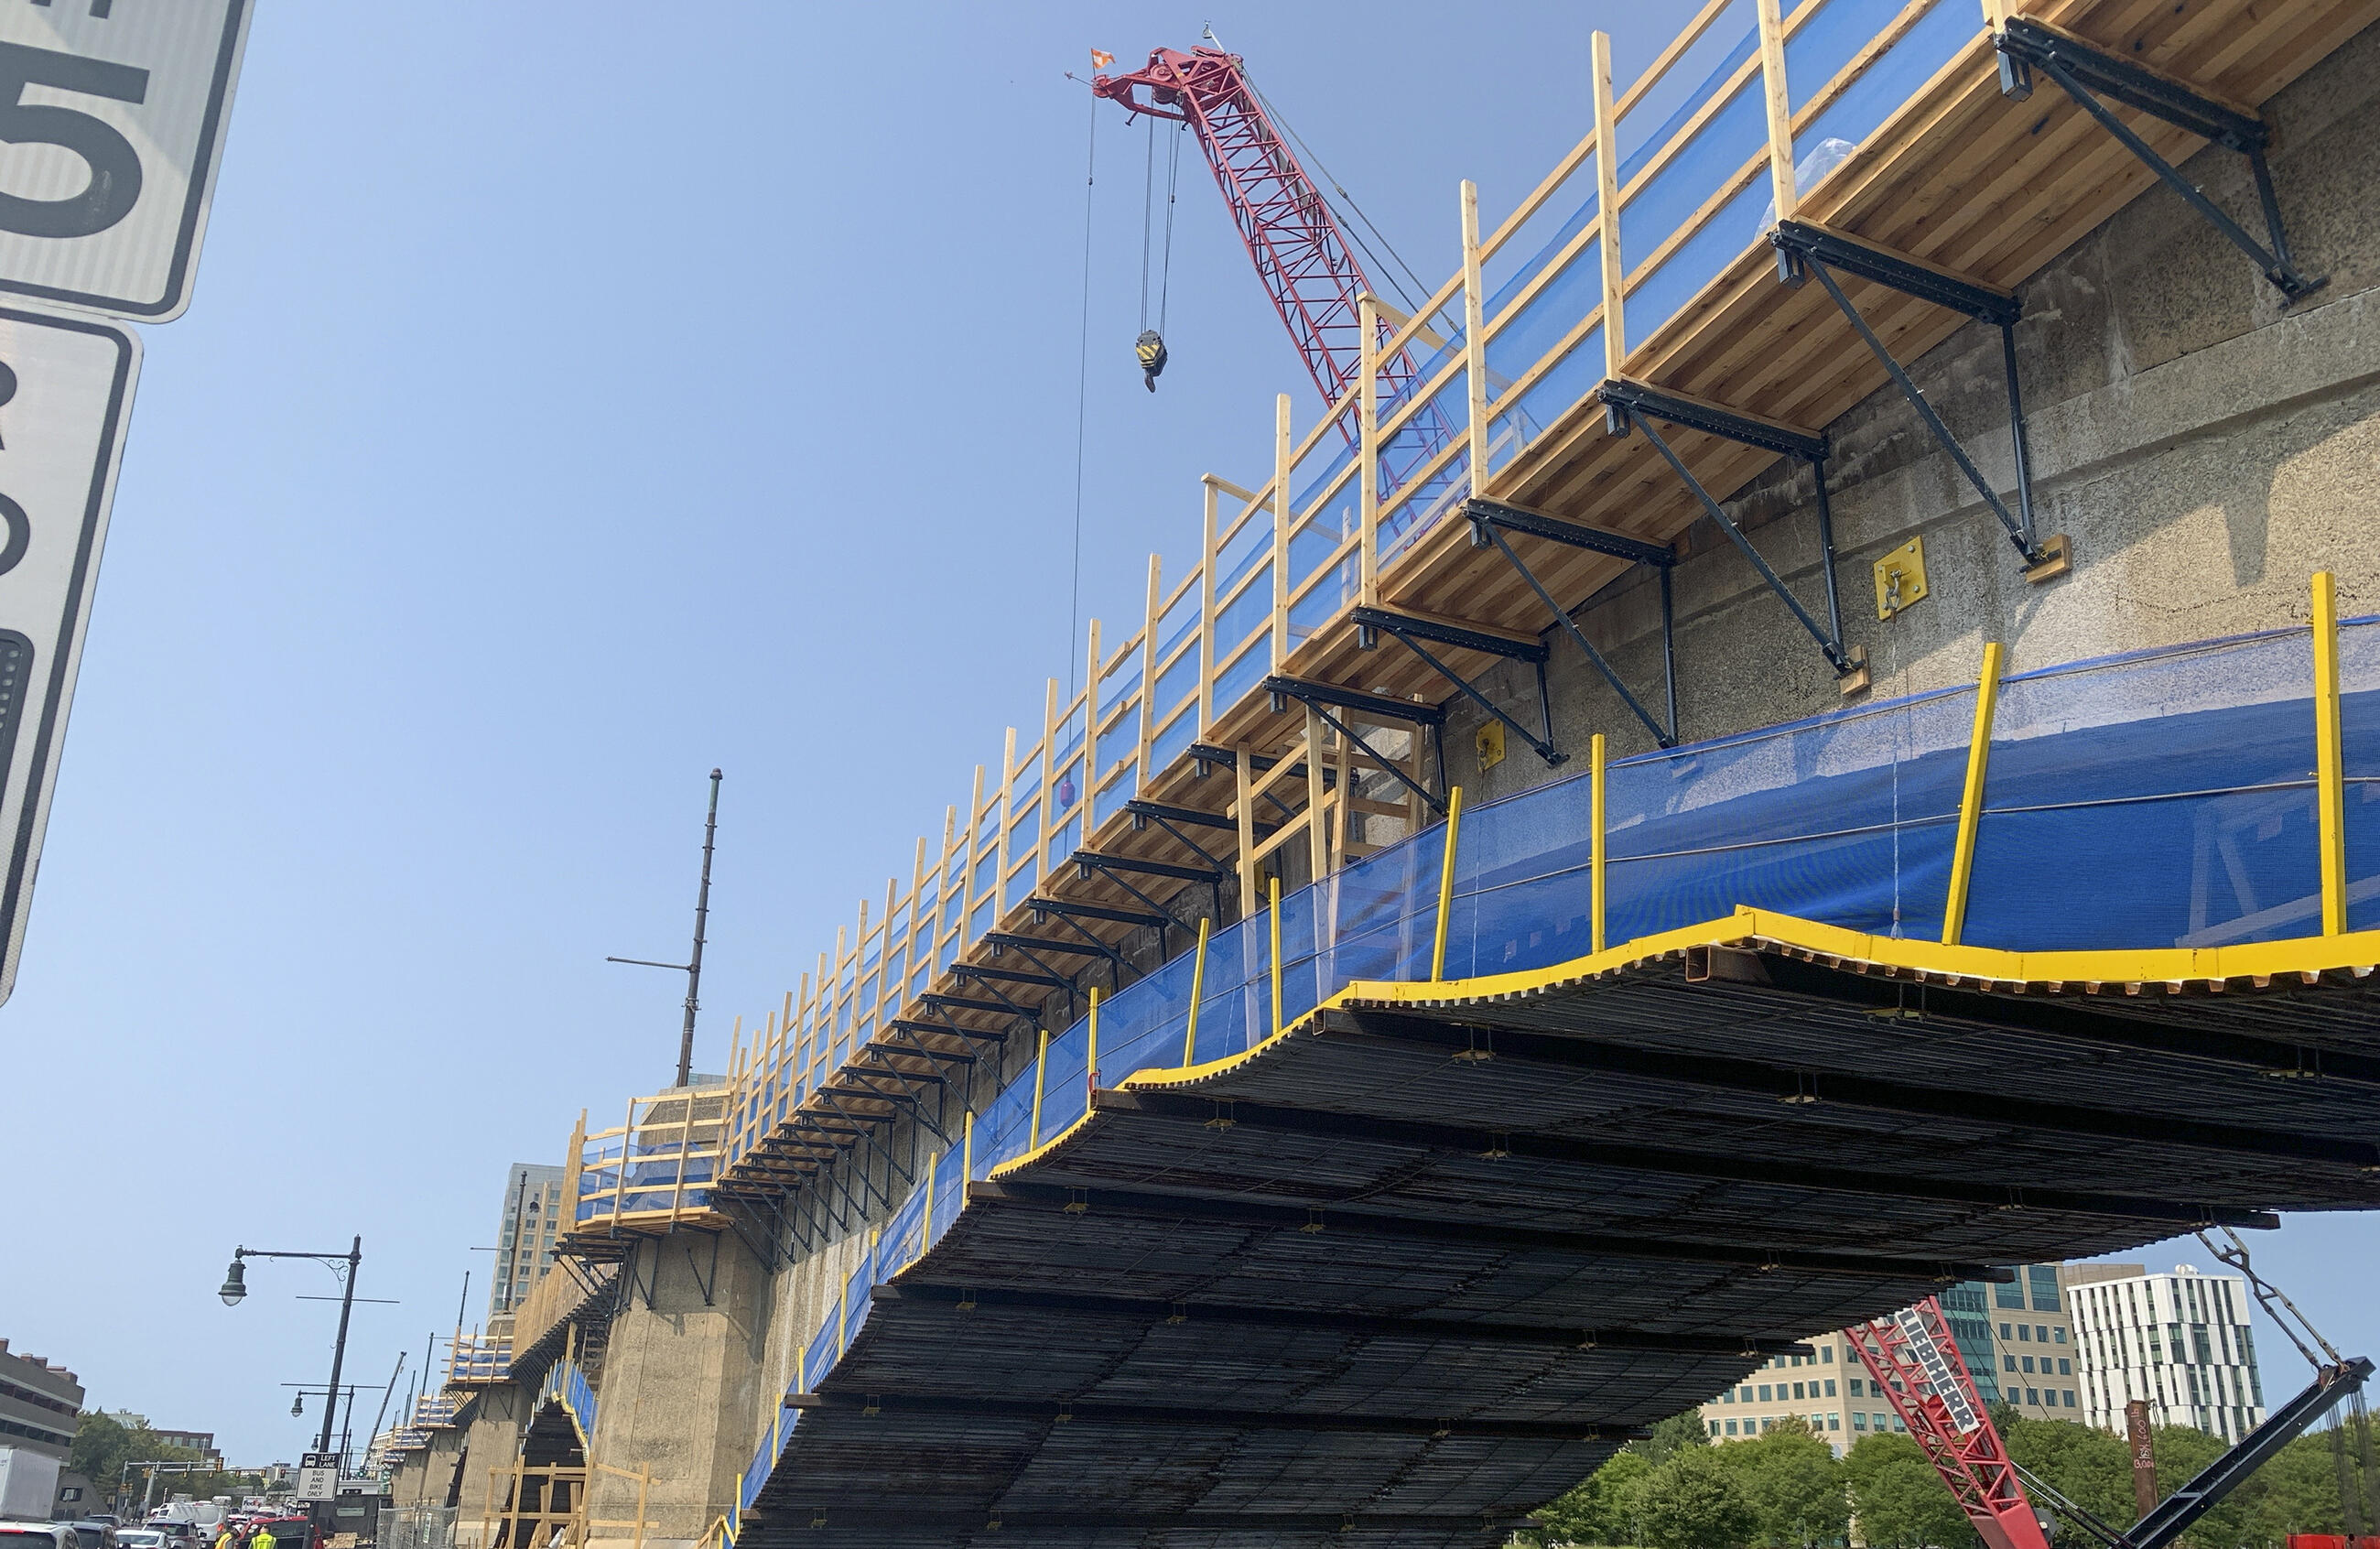 Construction on the Lechmere Viaduct in Summer 2021.